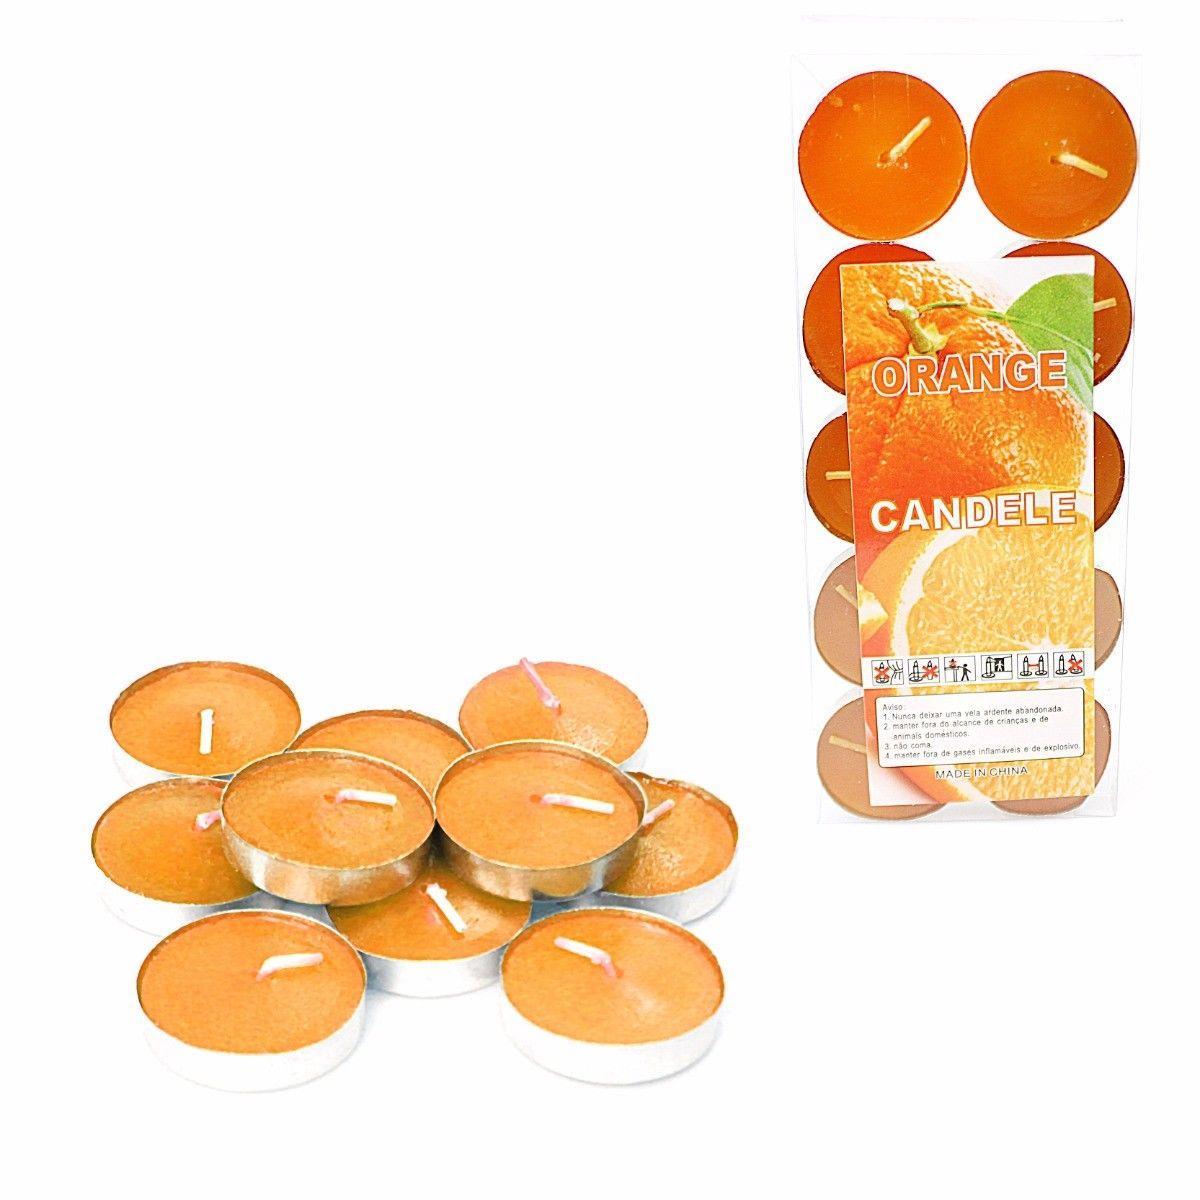 10 Pack Scented Wax Tea Light Candles Assorted Scents 0232 (Large Letter Rate)